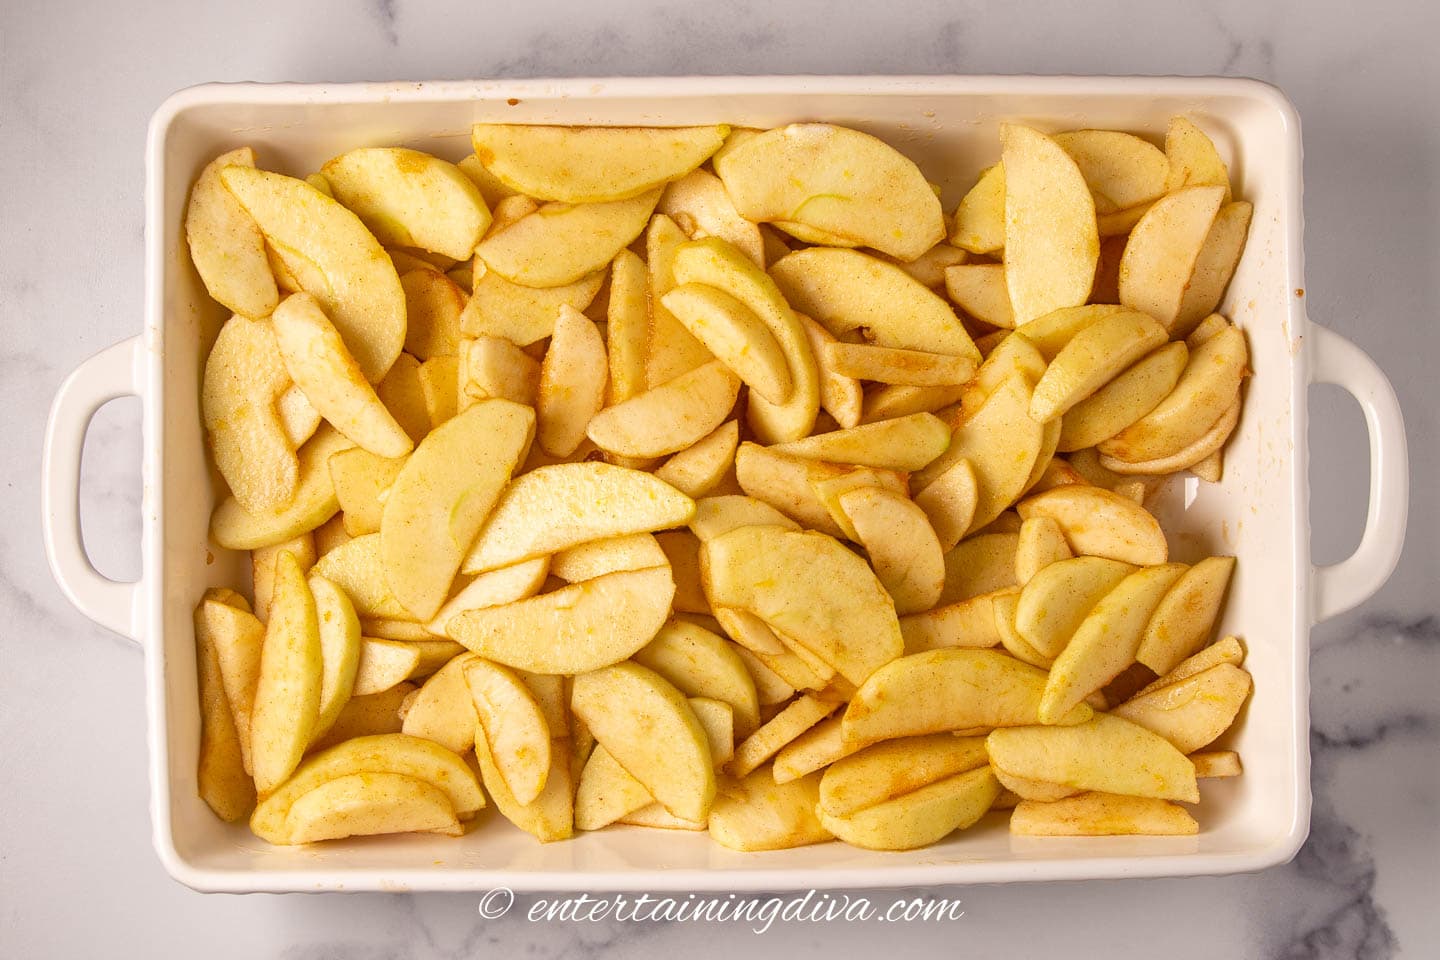 apples spread out in a 9" x 13" baking pan